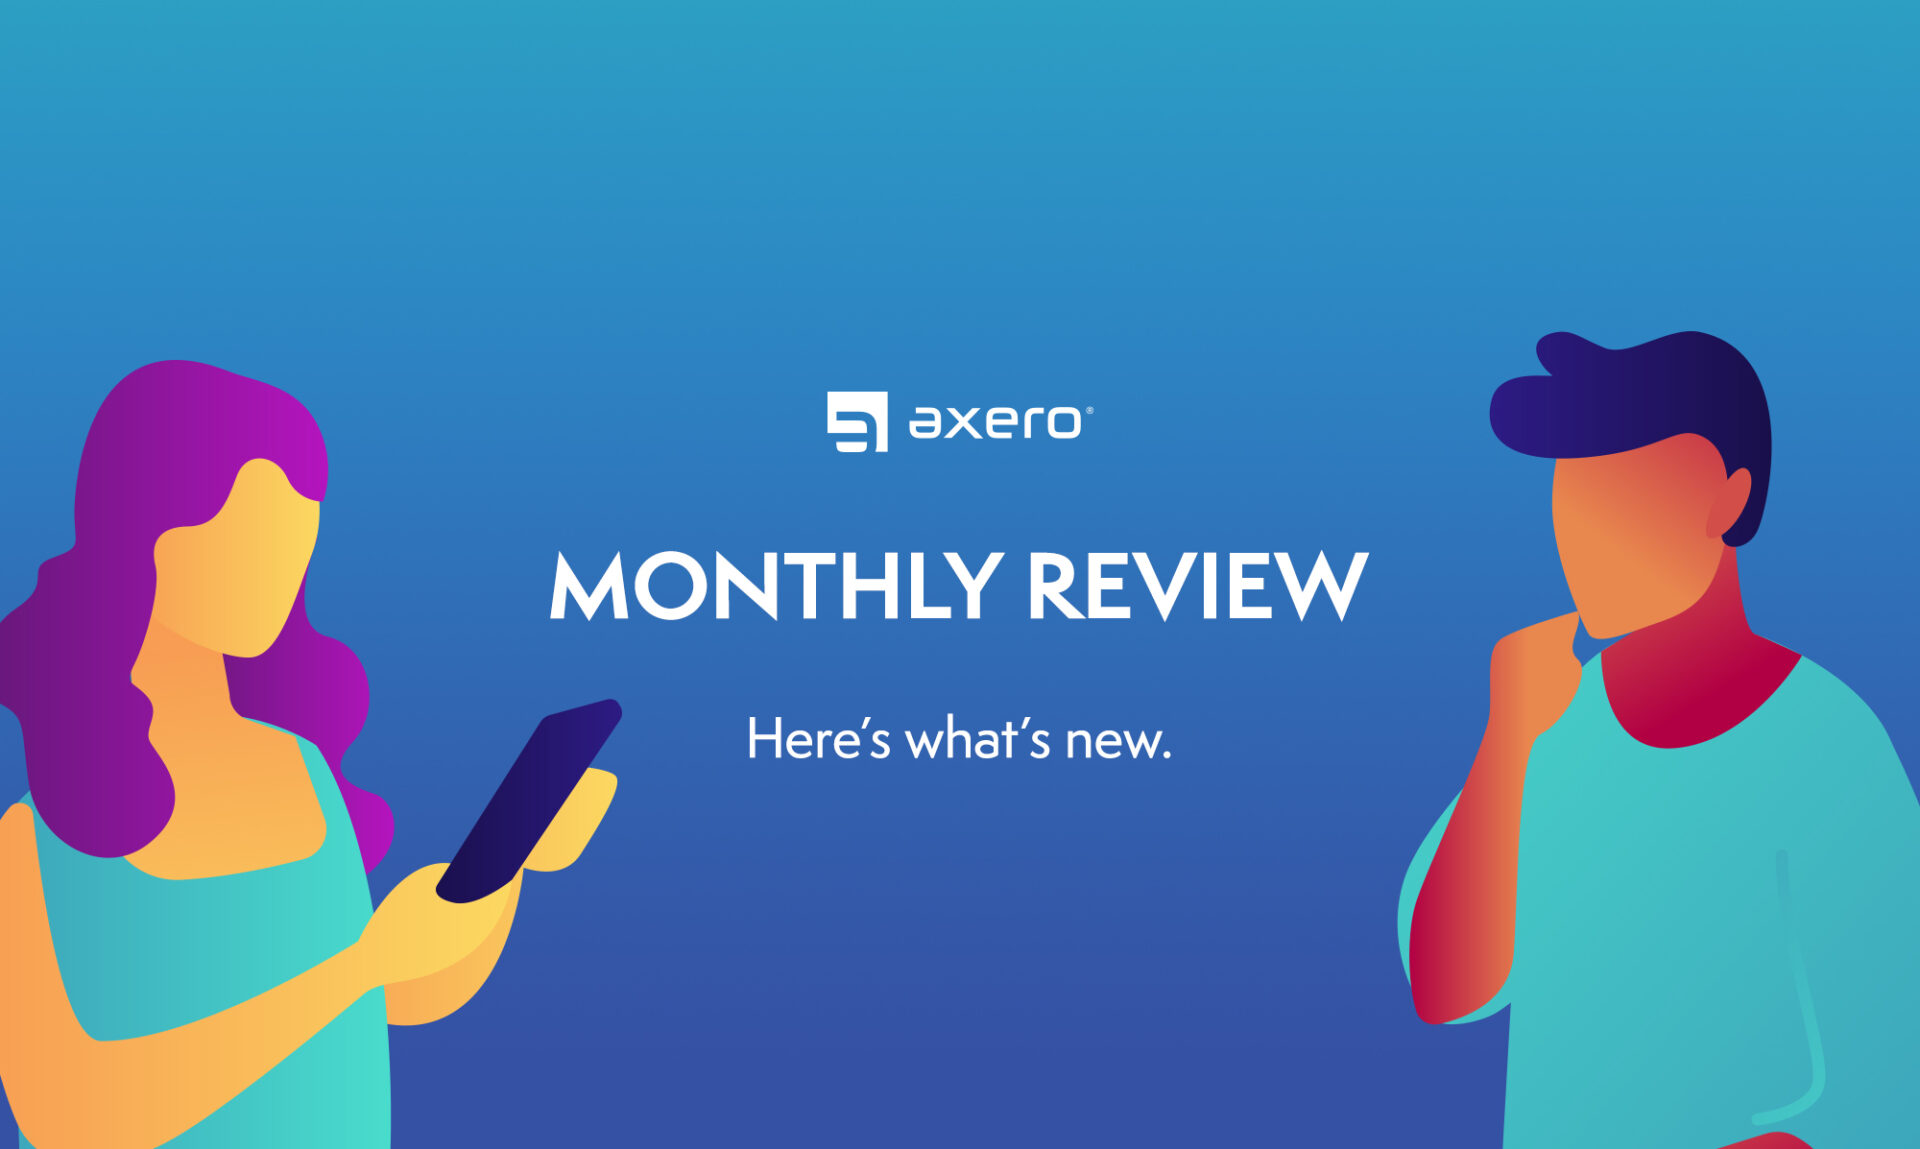 Axero Recognized as Champion, New Reminders for Required Reading, and Improve Communications